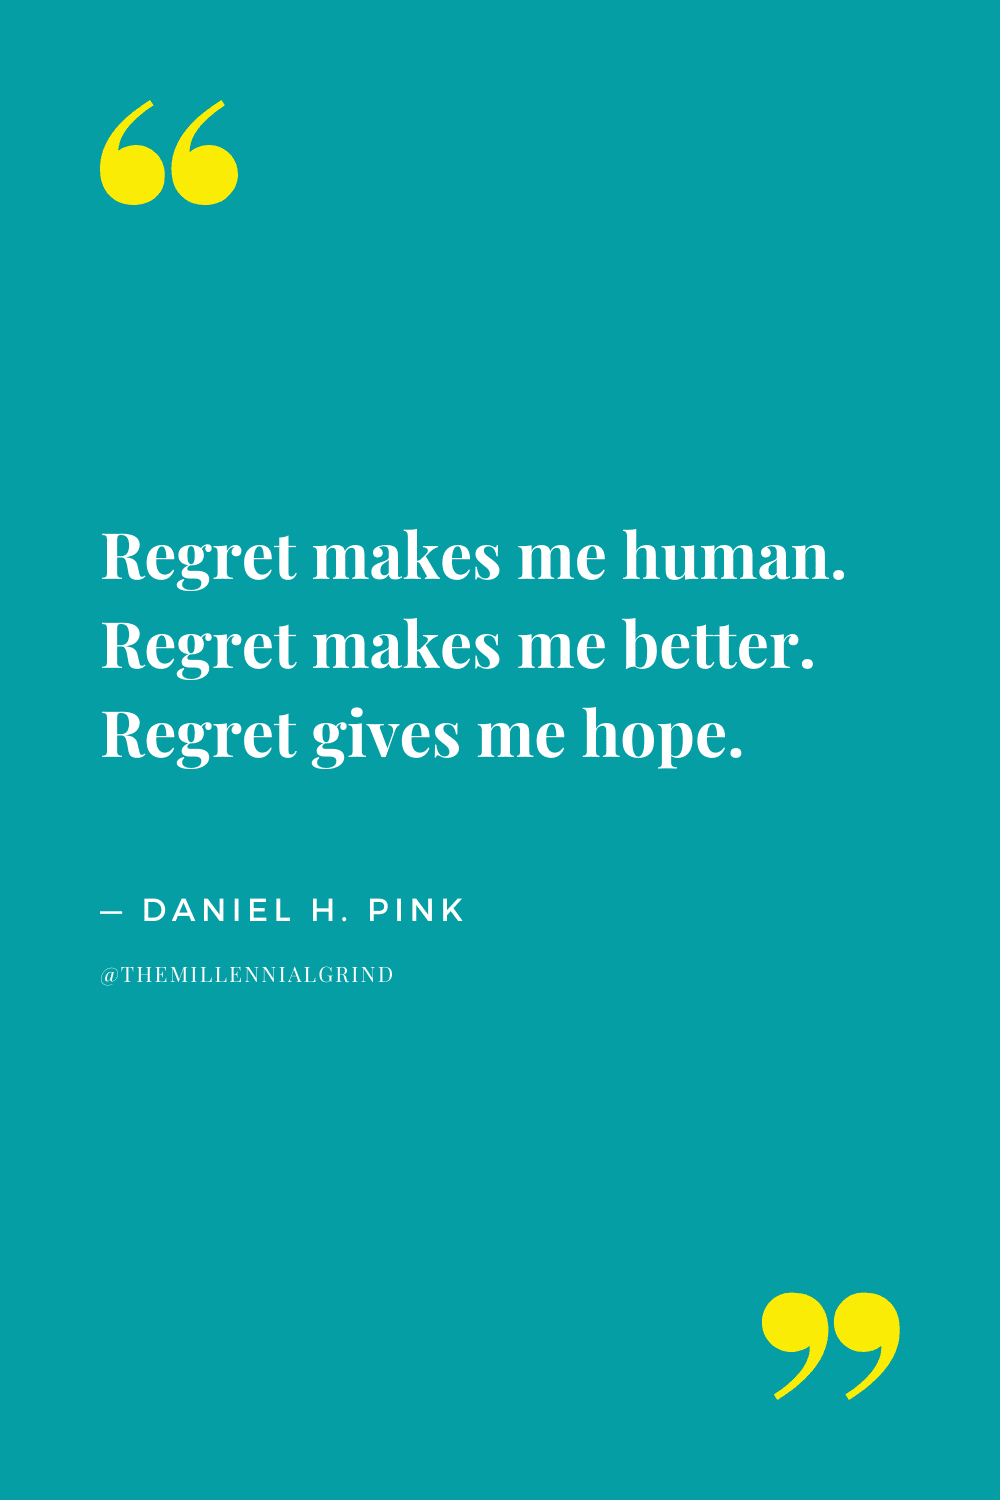 Quotes from The Power of Regret by Daniel H. Pink